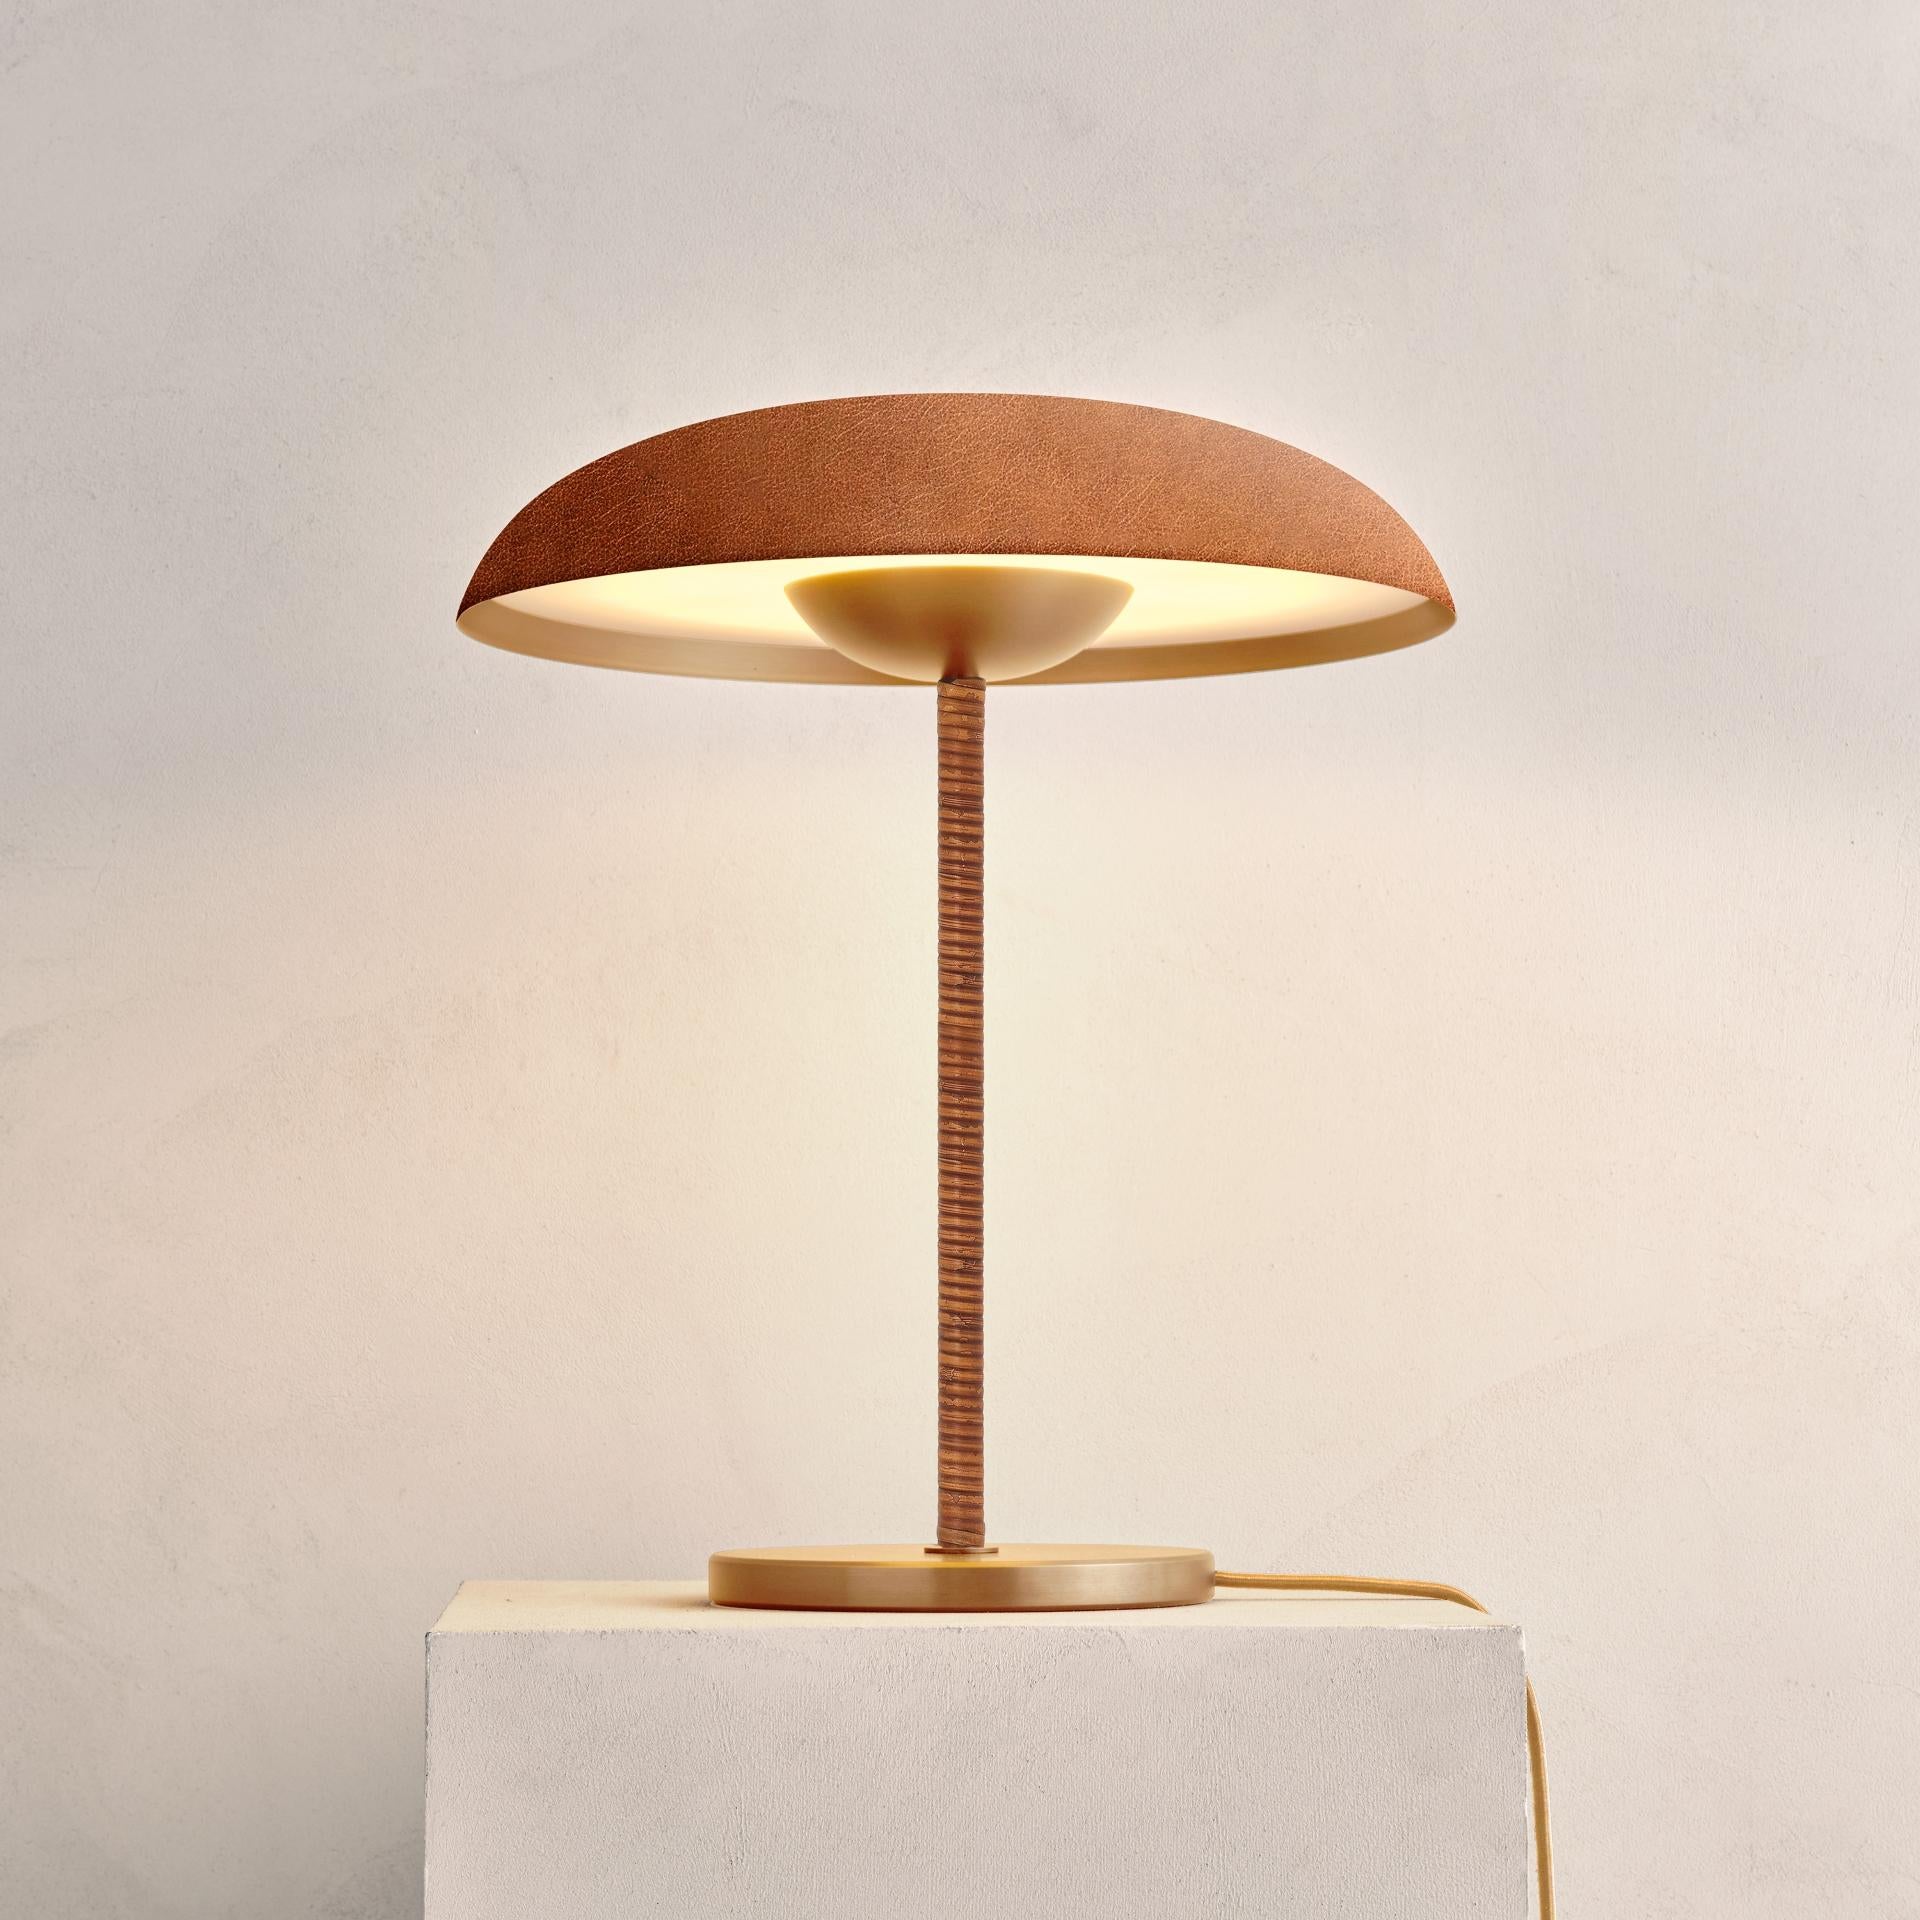 Taking inspiration from planetary shapes and textures, the Cosmic collection artfully explores the interplay of metal properties and a curated selection of patina finishes.
 
Handcrafted with a finely brushed brass shade and framework, and a leather